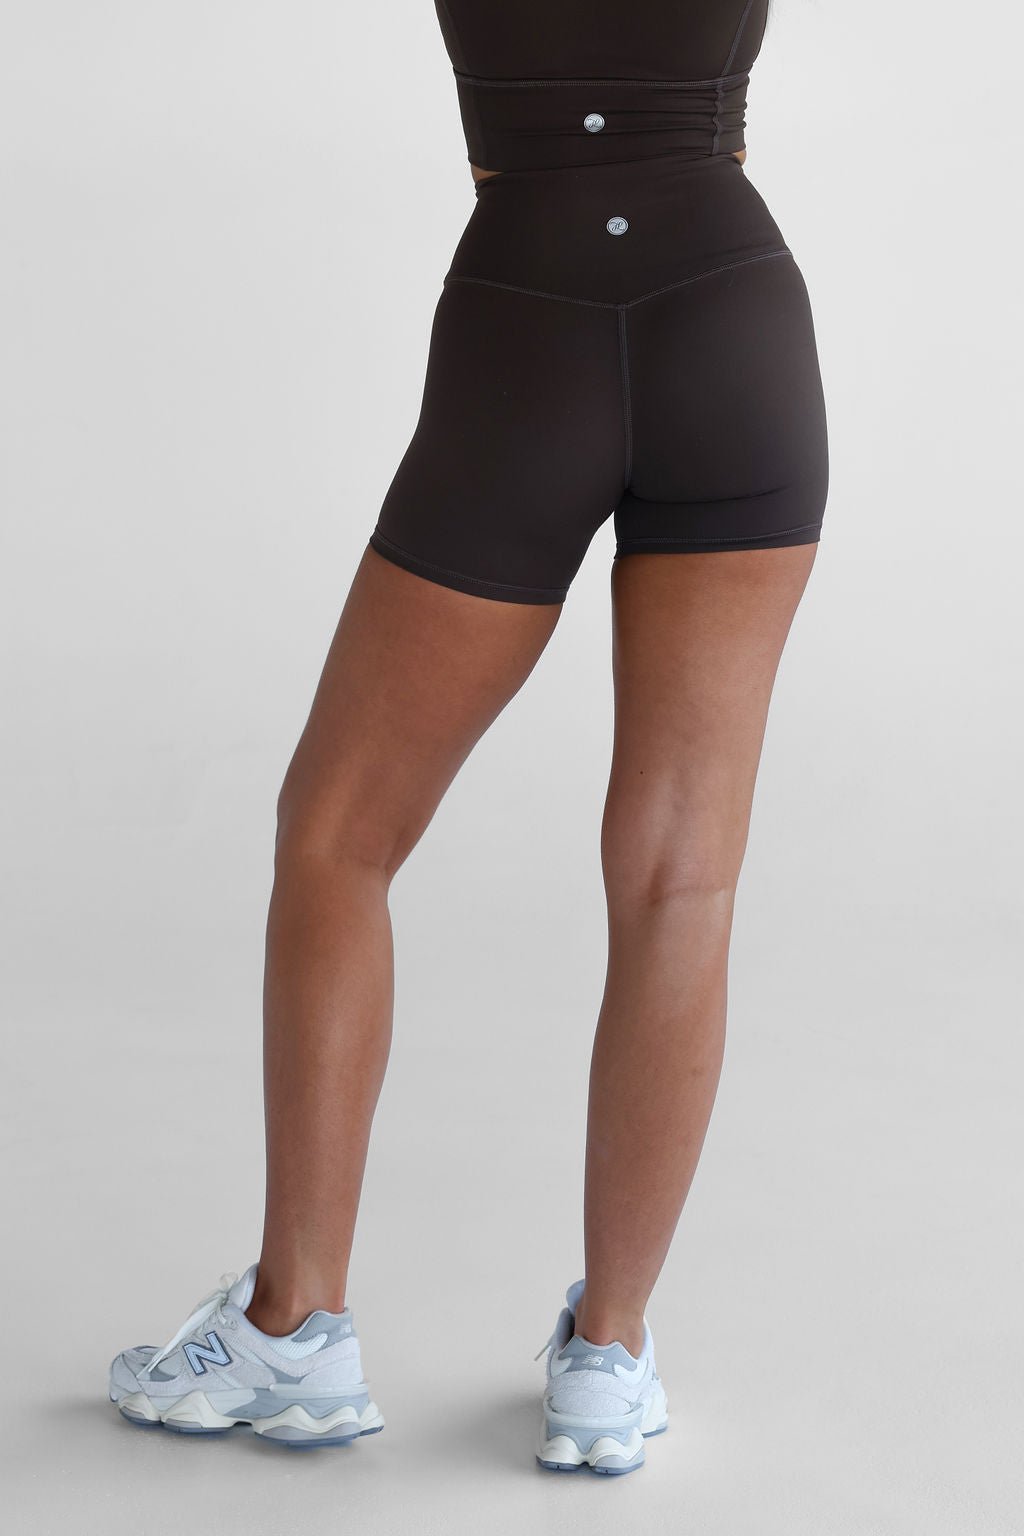 Black Biker Shorts, High Waisted, Squat Proof, 5 Star Rated